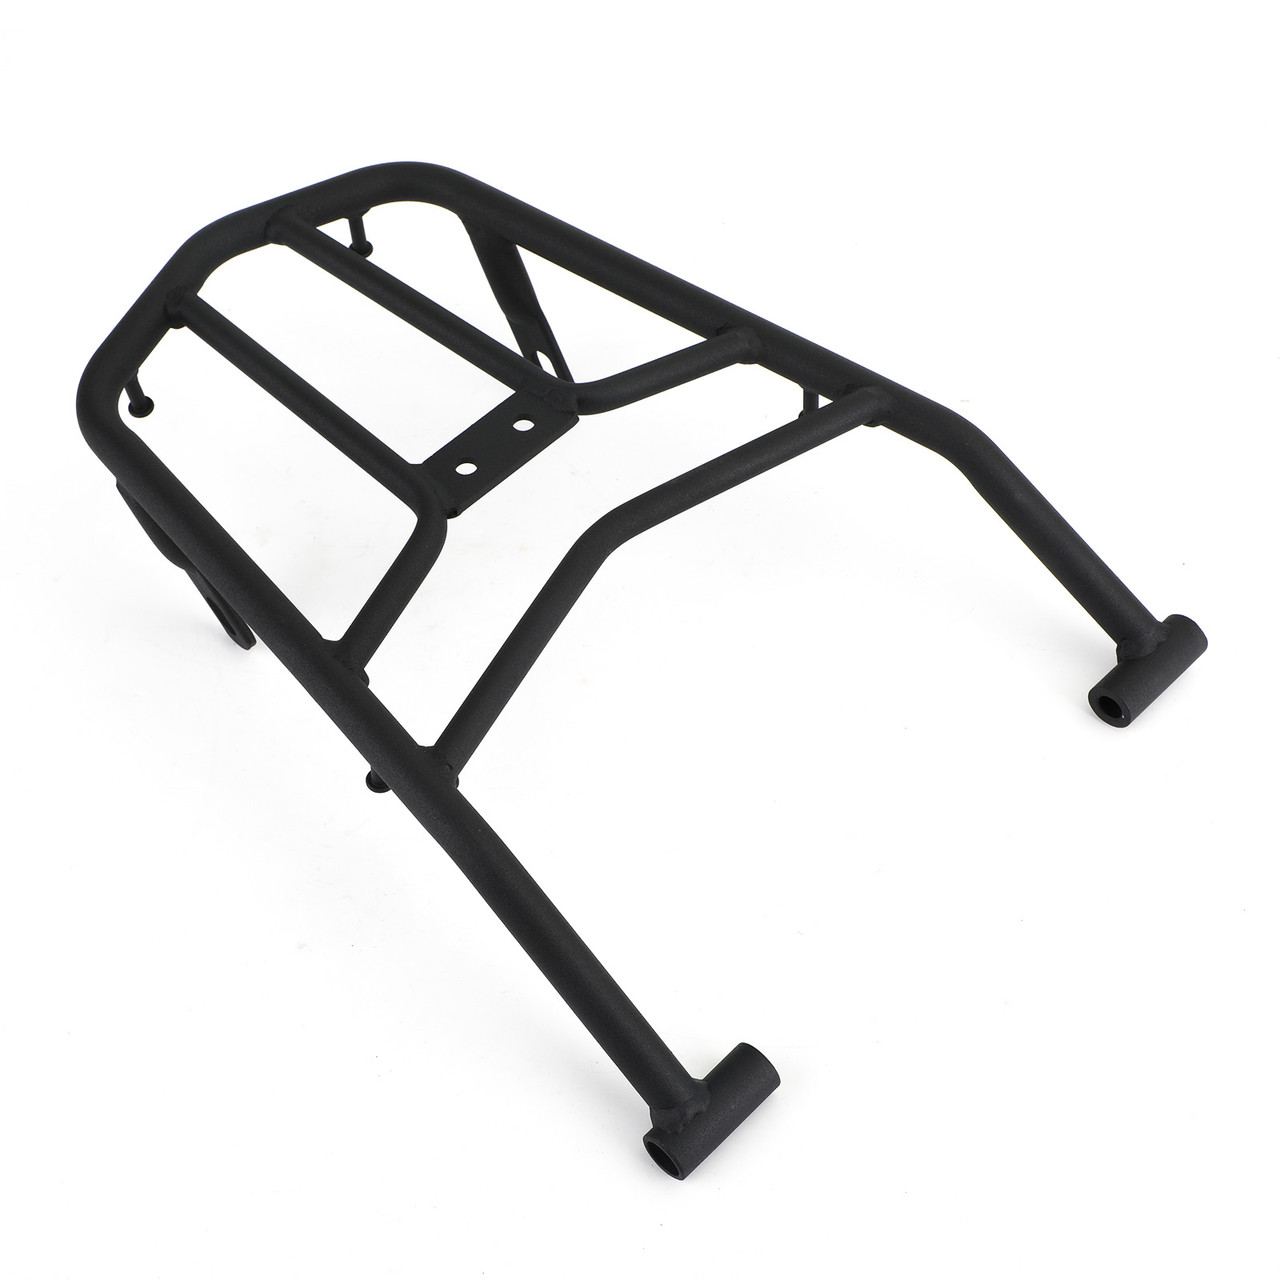 Rear Cargo Rack Luggage Support Shelf Fit for Honda CRF250M CRF250L Rally 12-19 Black